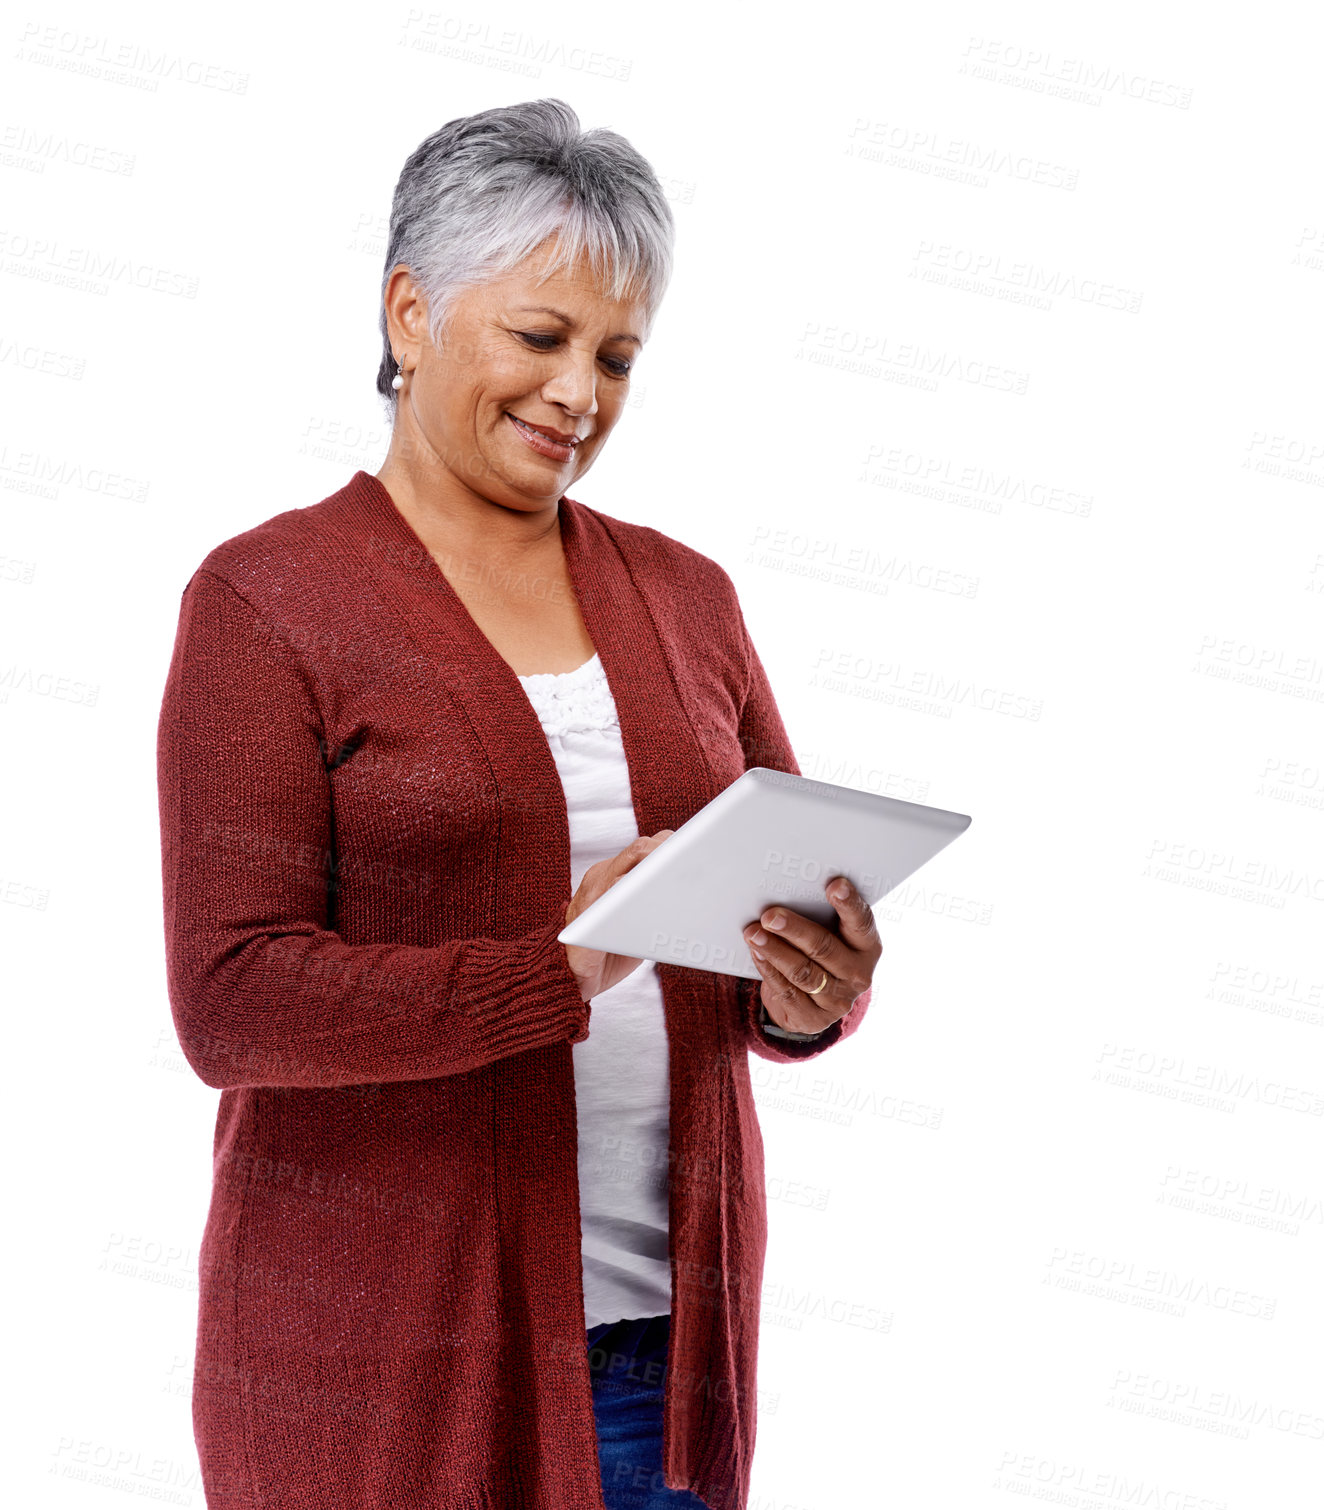 Buy stock photo Studio shot of a mature woman using a digital tablet isolated on white